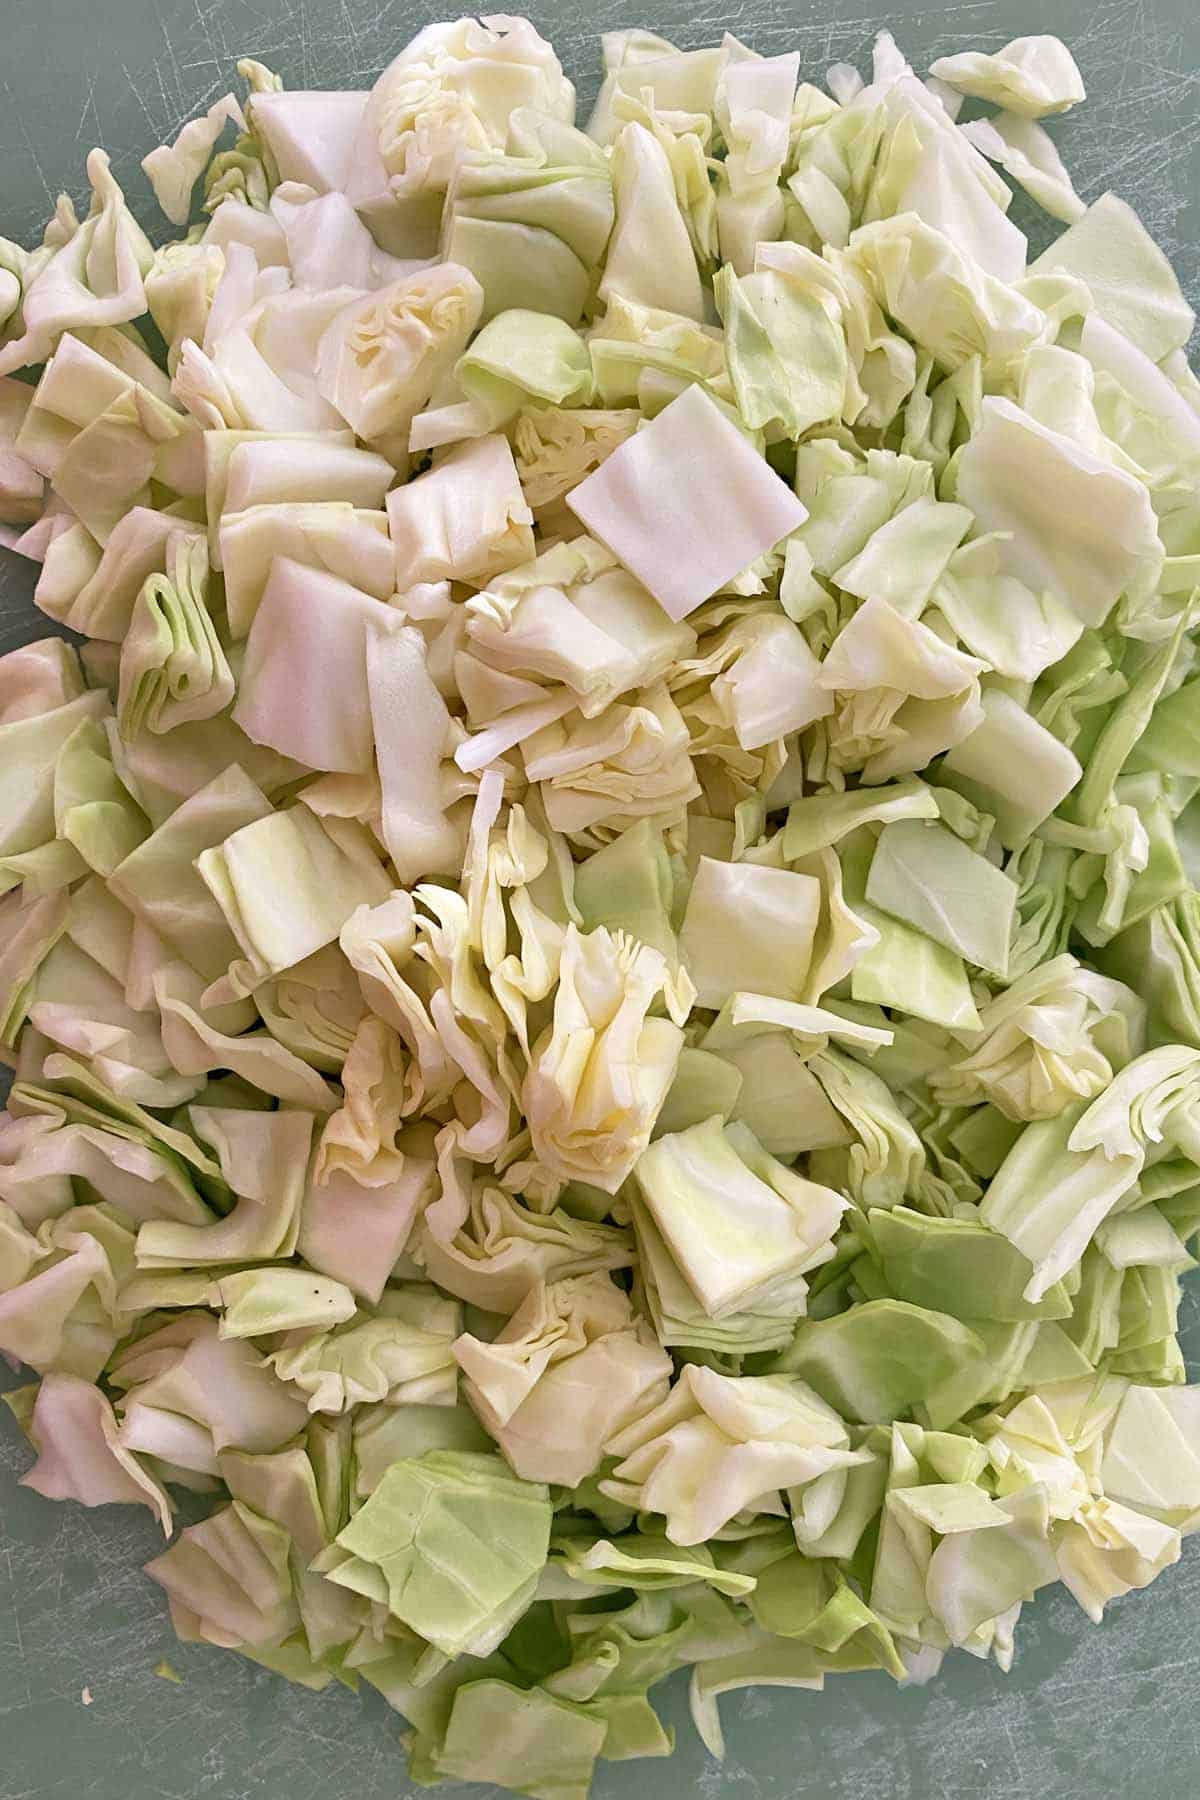 chopped cabbage on a green cutting board.